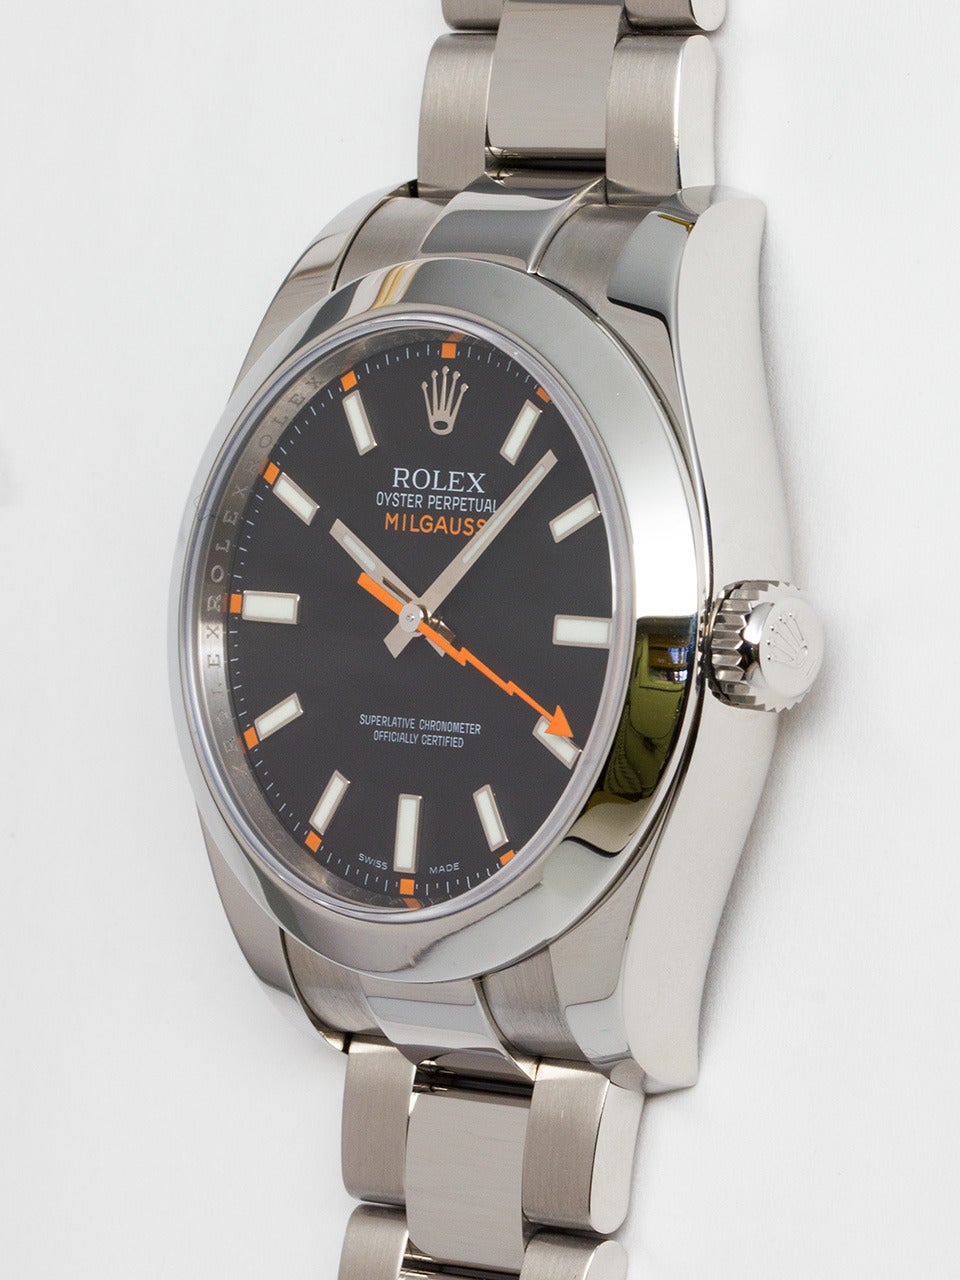 Rolex Stainless Steel Milgauss Chronometer Wristwatch Ref 116400 In Excellent Condition In West Hollywood, CA